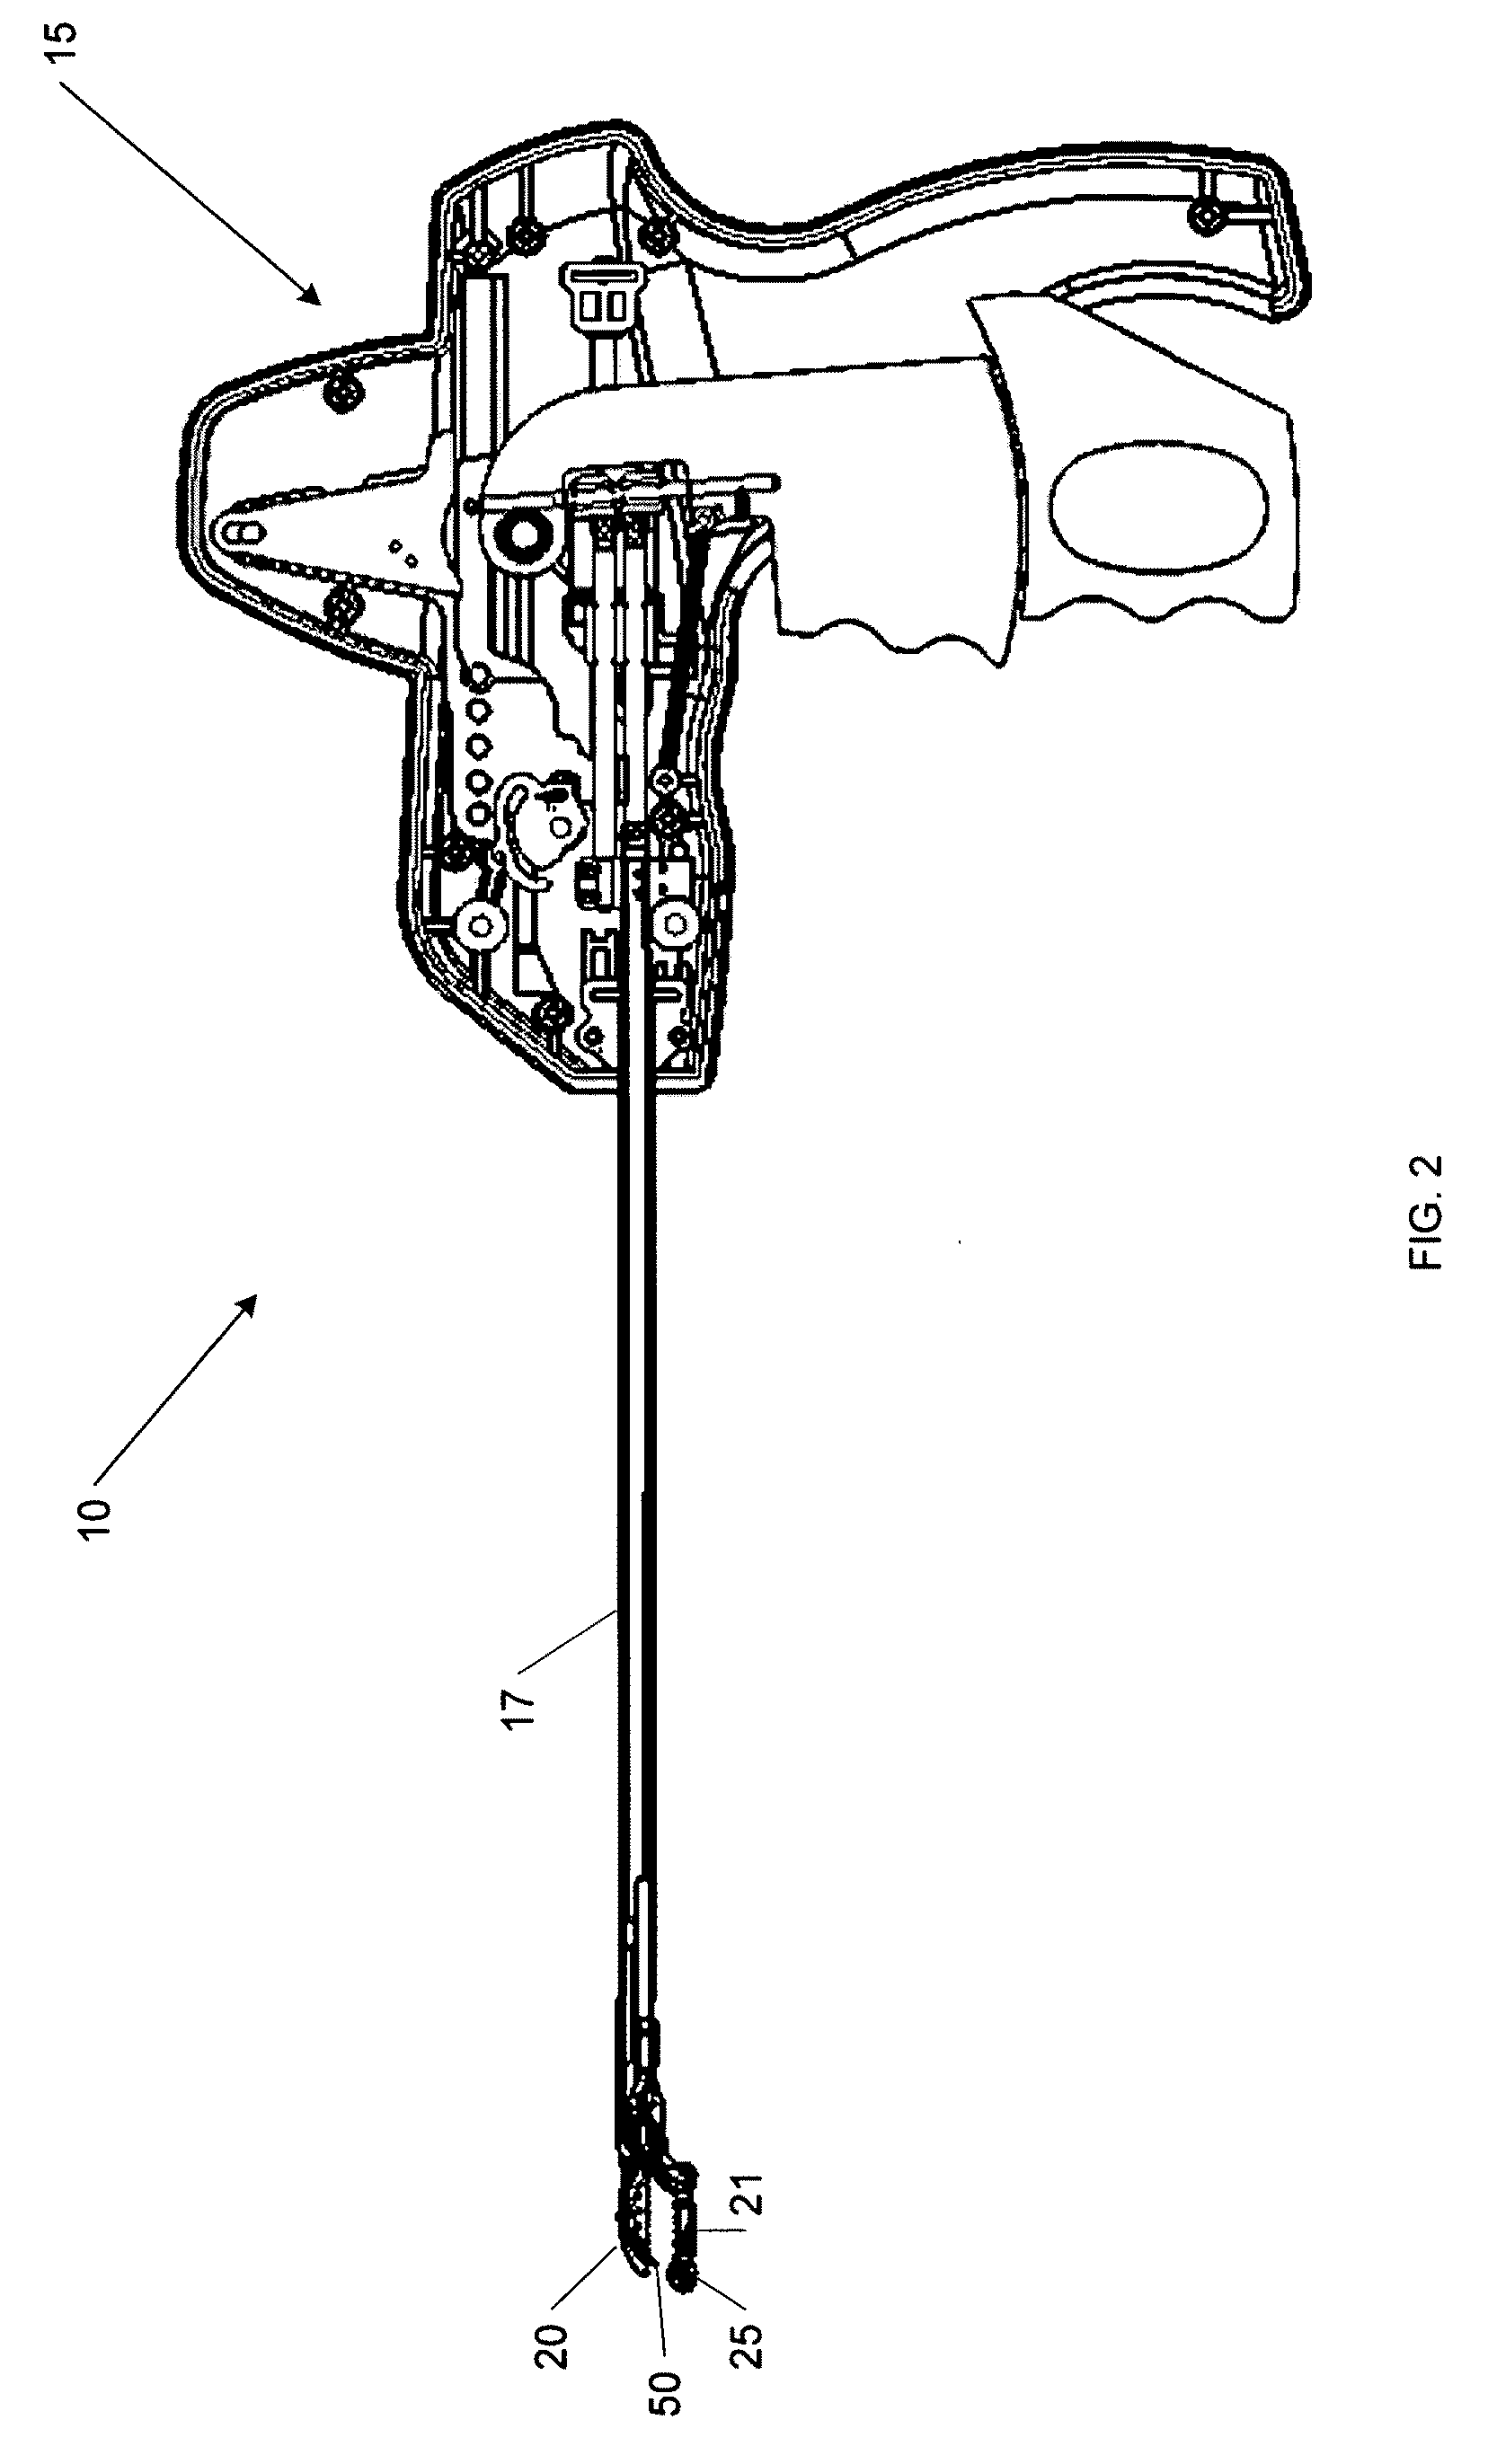 Suture passing instrument and method